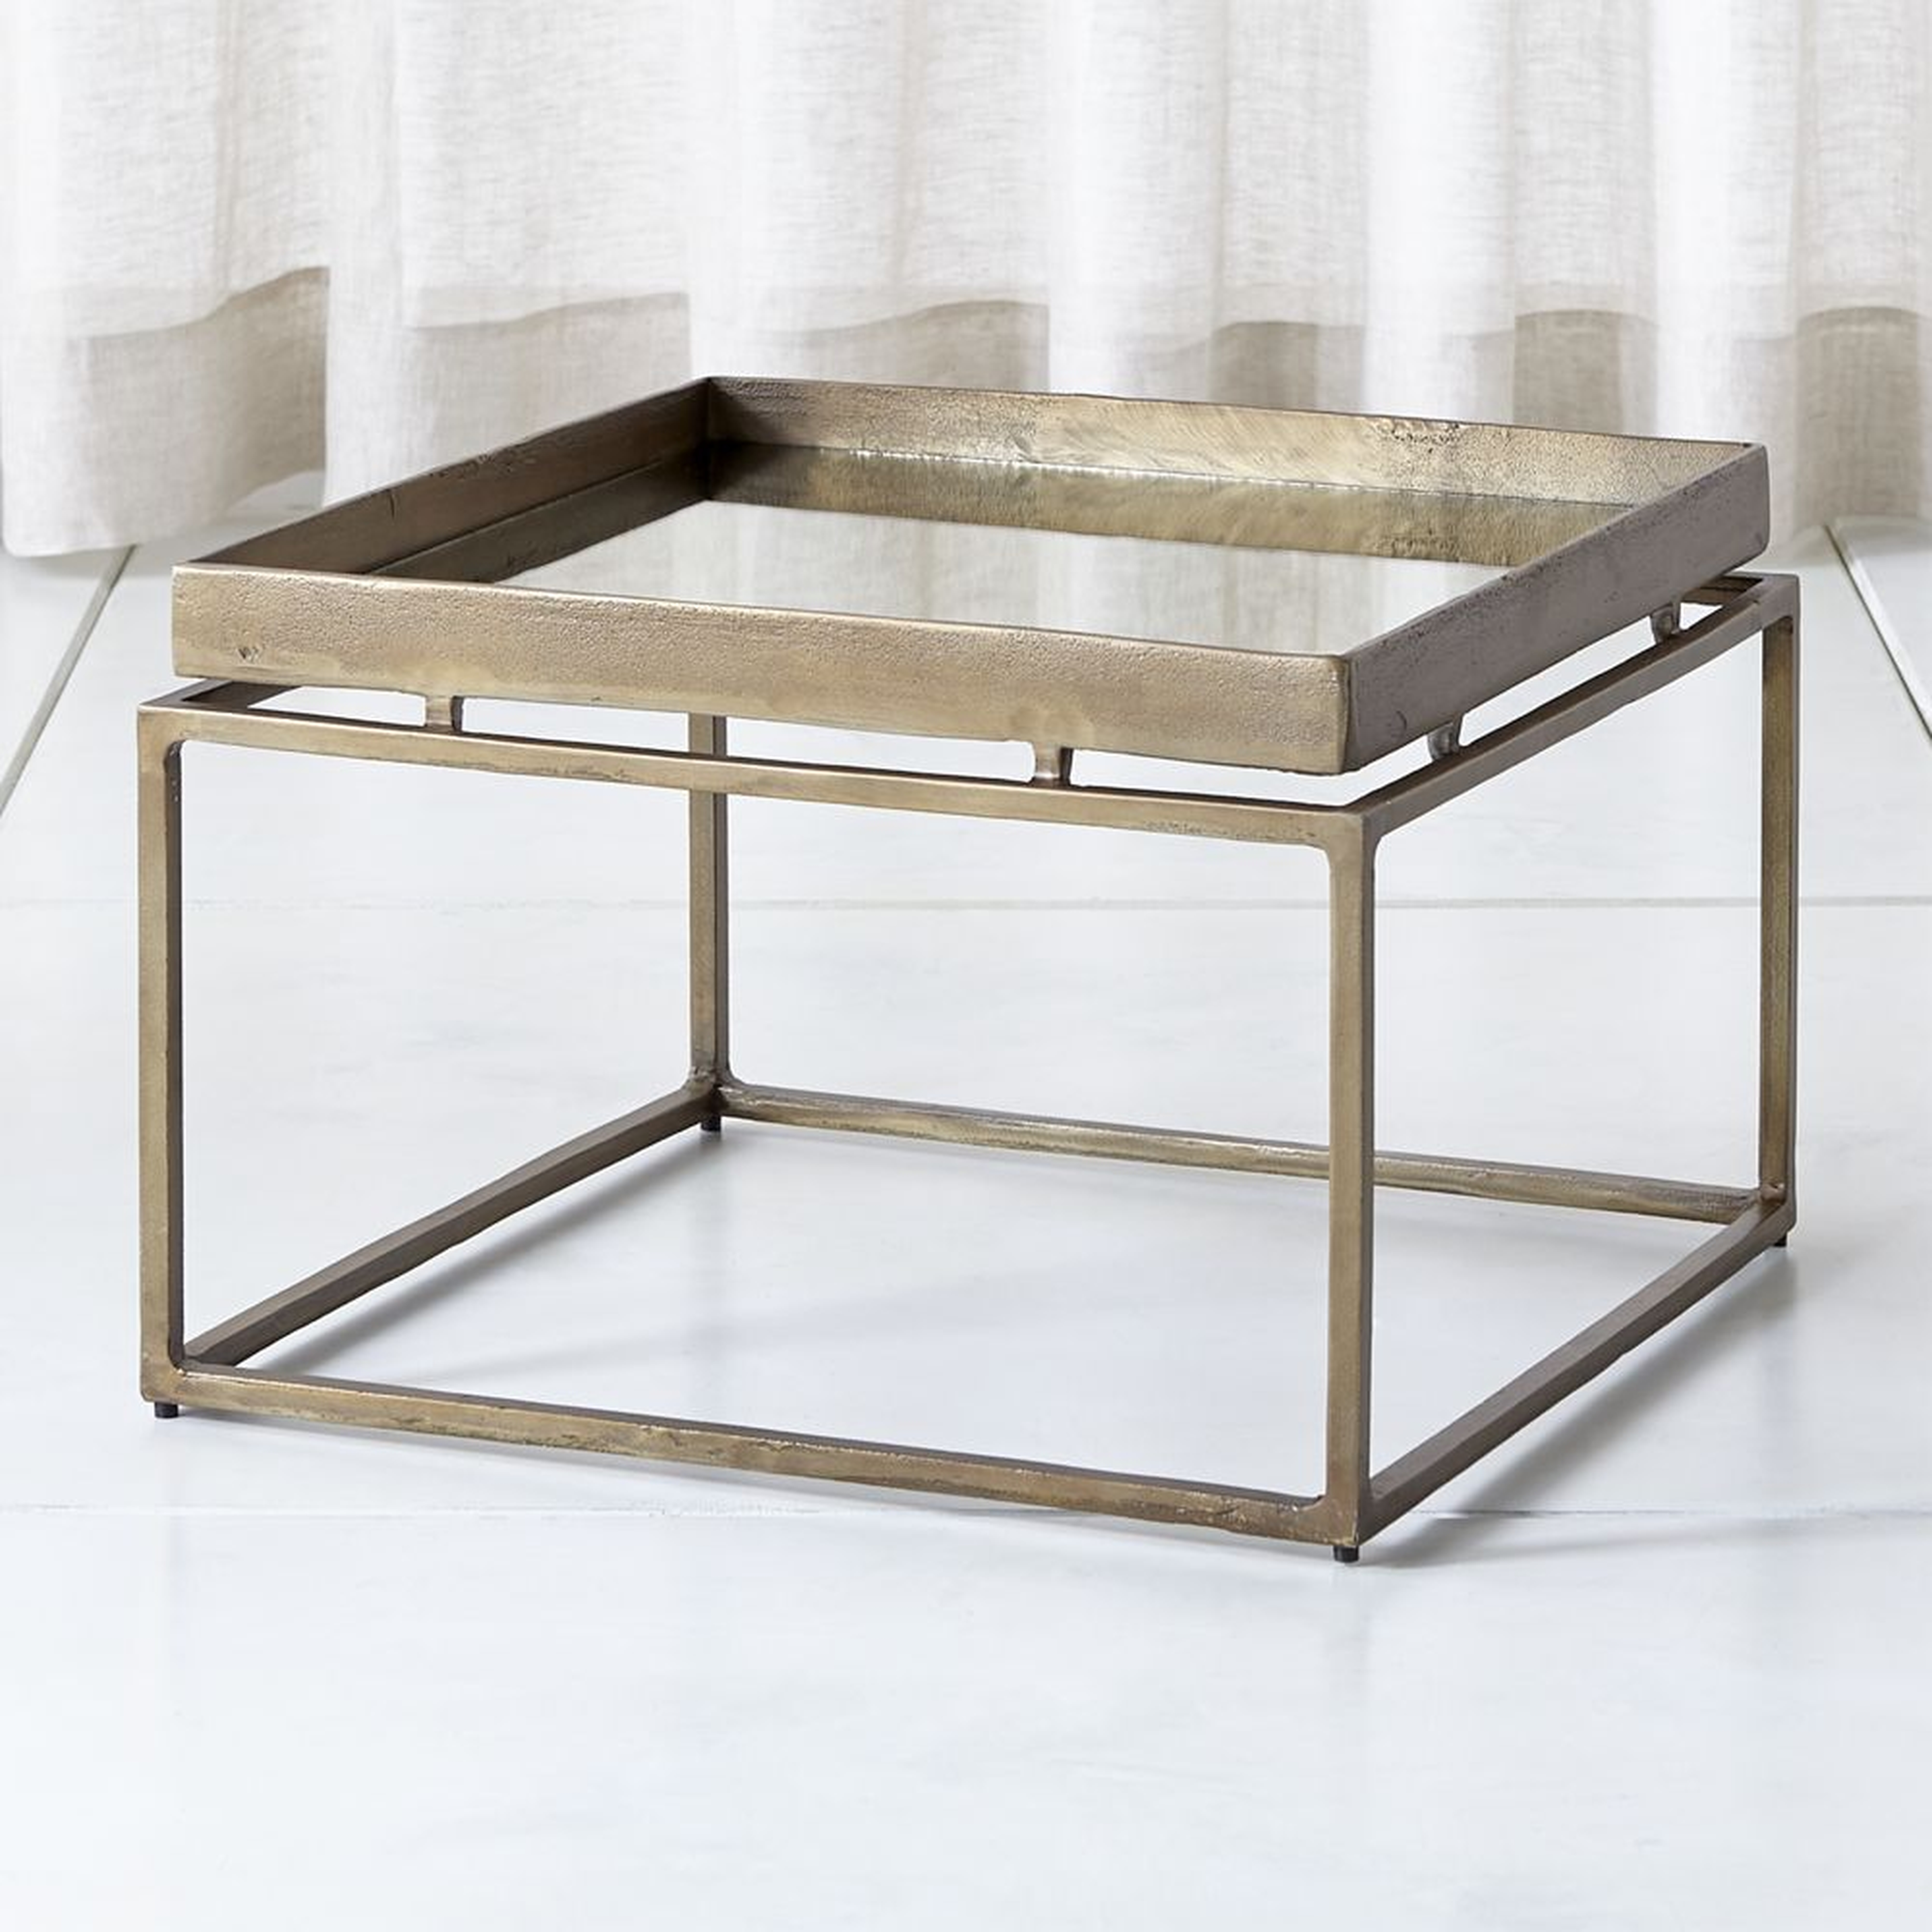 Echo Bunching Table - Crate and Barrel